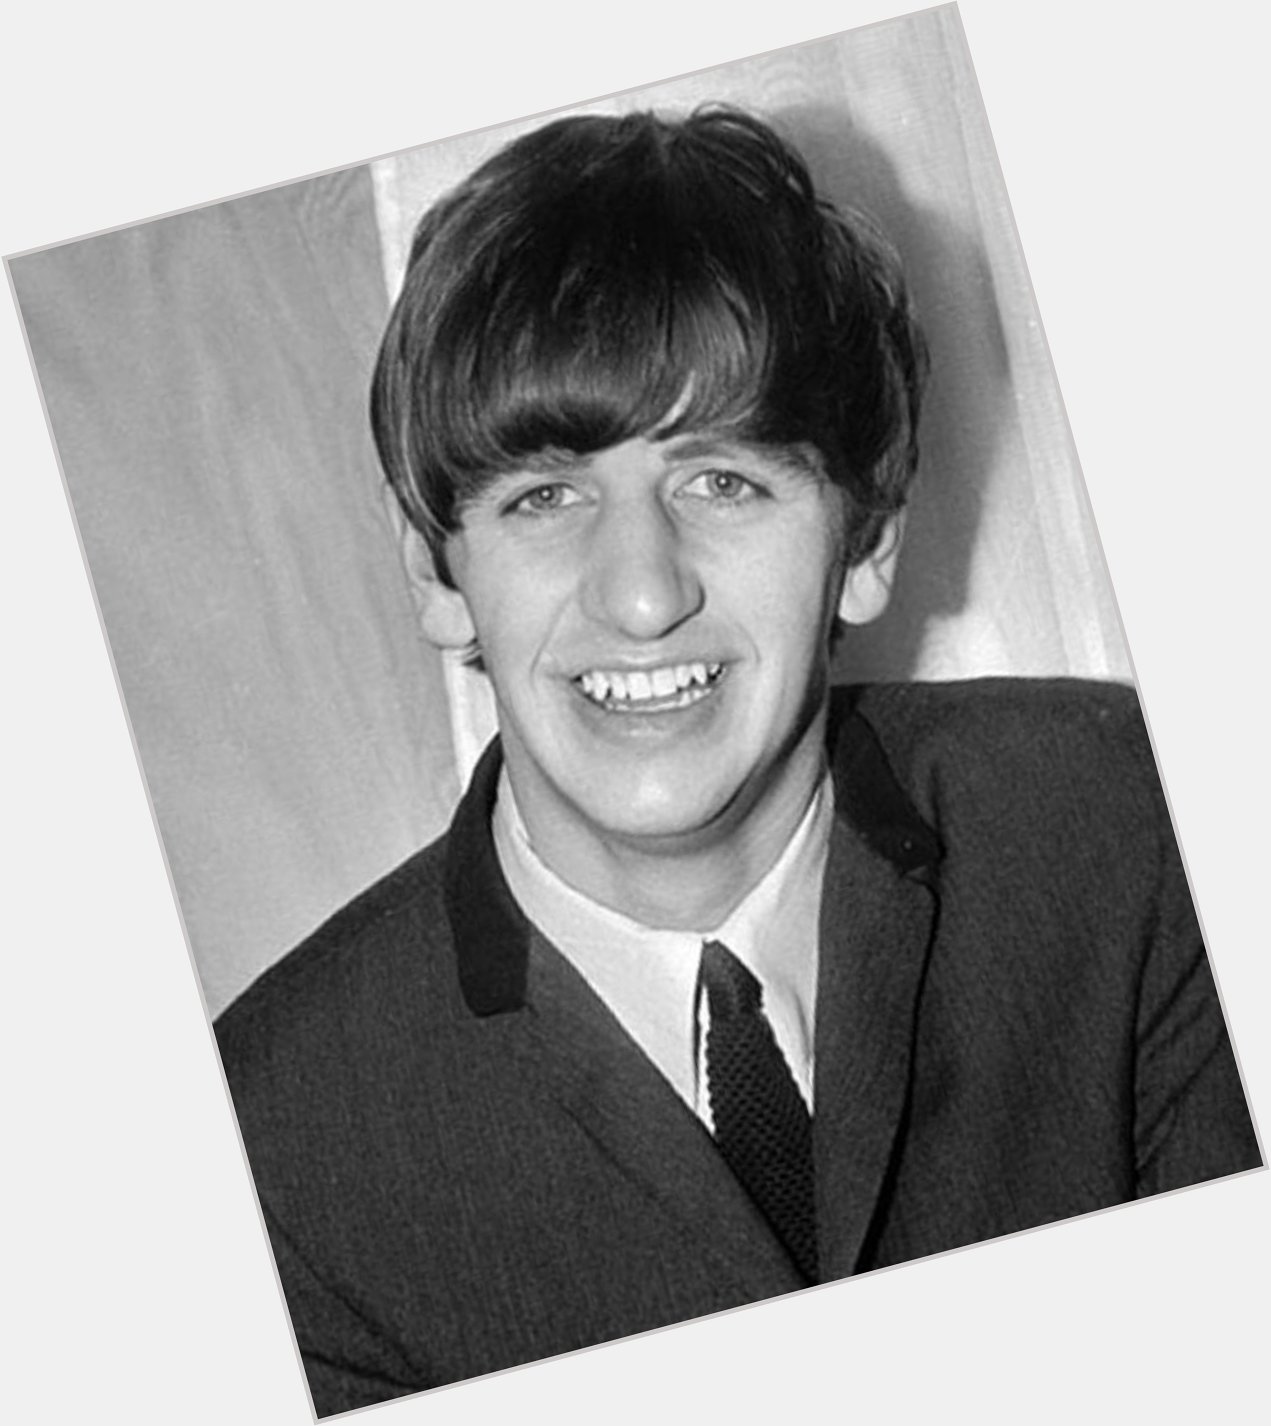 Iyaaa ... cannot believe I m saying these words, but here goes. HAPPY 80th BIRTHDAY RINGO STARR!!! 